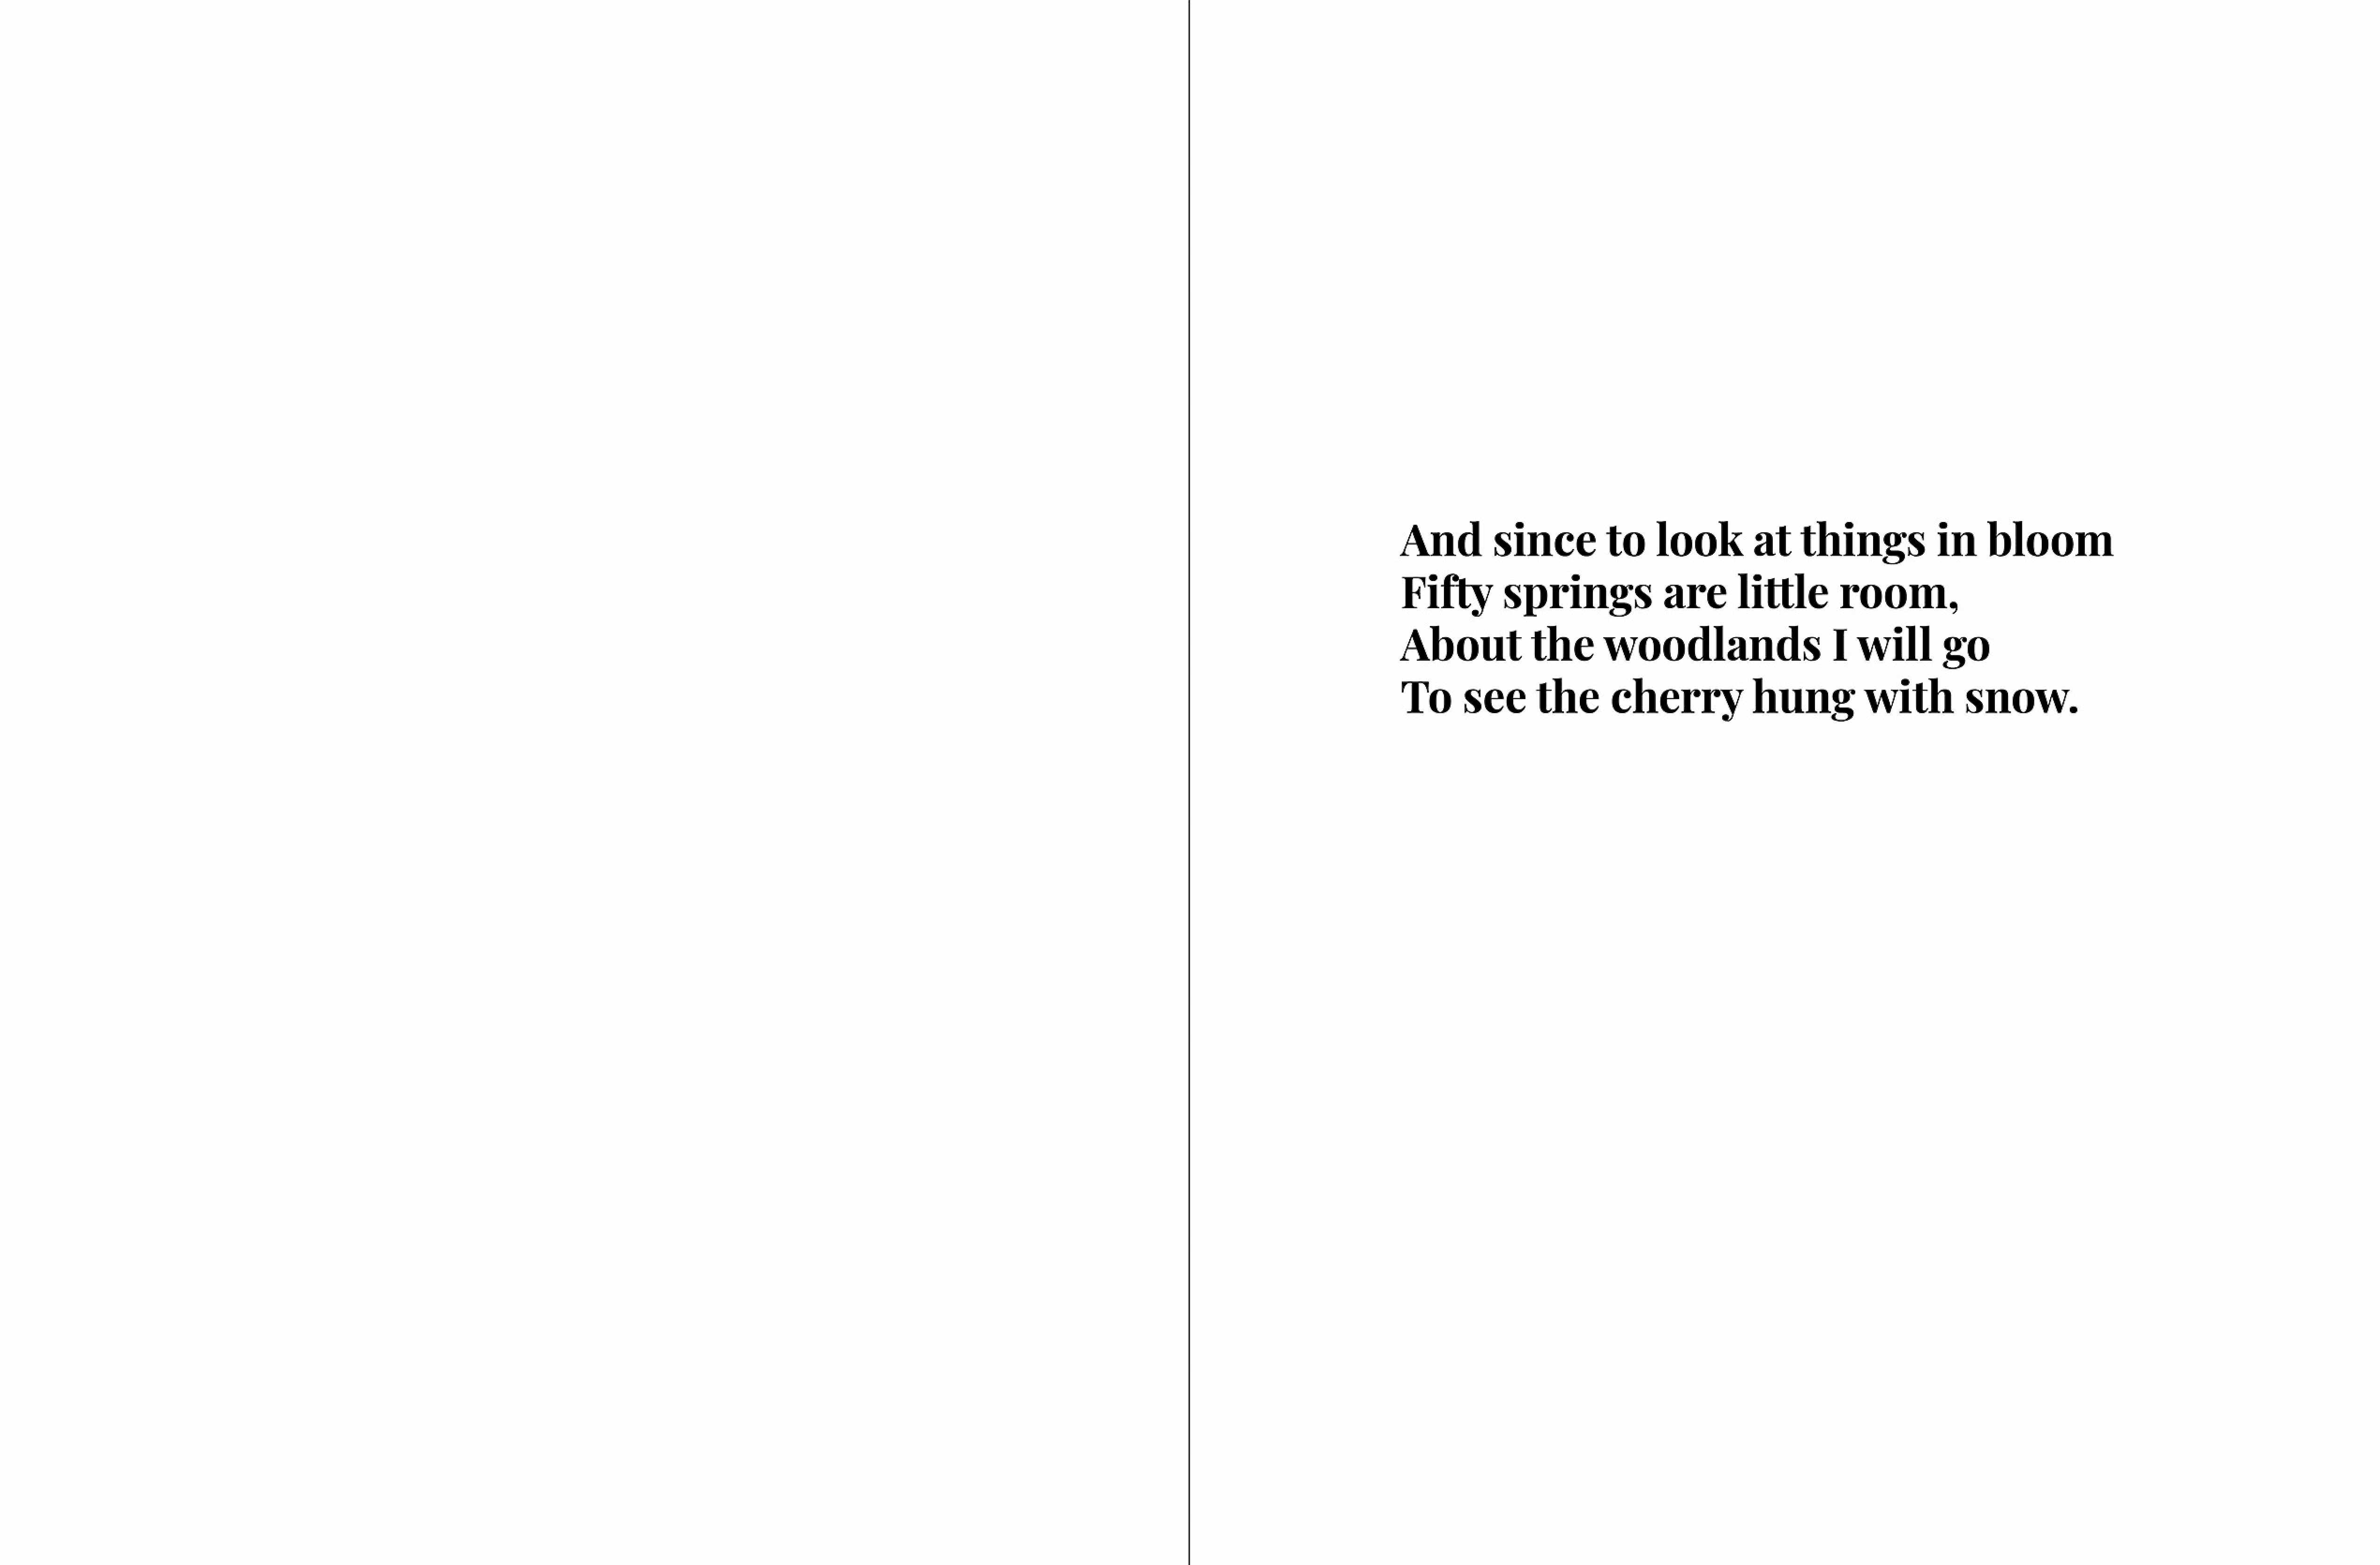 To look at things in bloom 08 - Photographs by Scott Mead and words by A.E. Housman